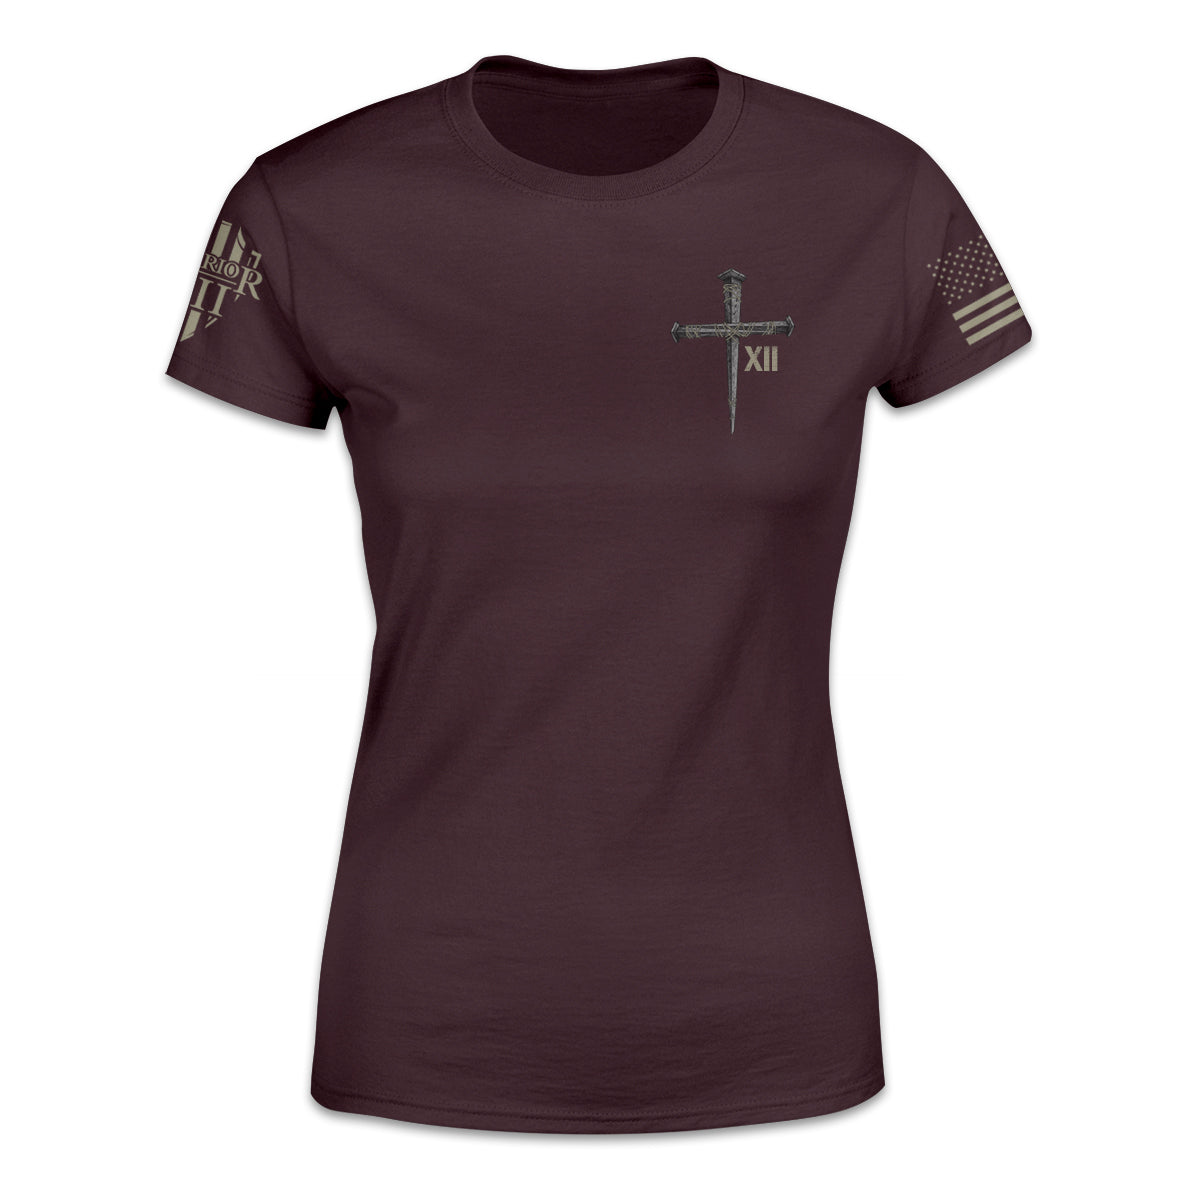 A burgundy women's relaxed fit shirt with a cross printed on the front.